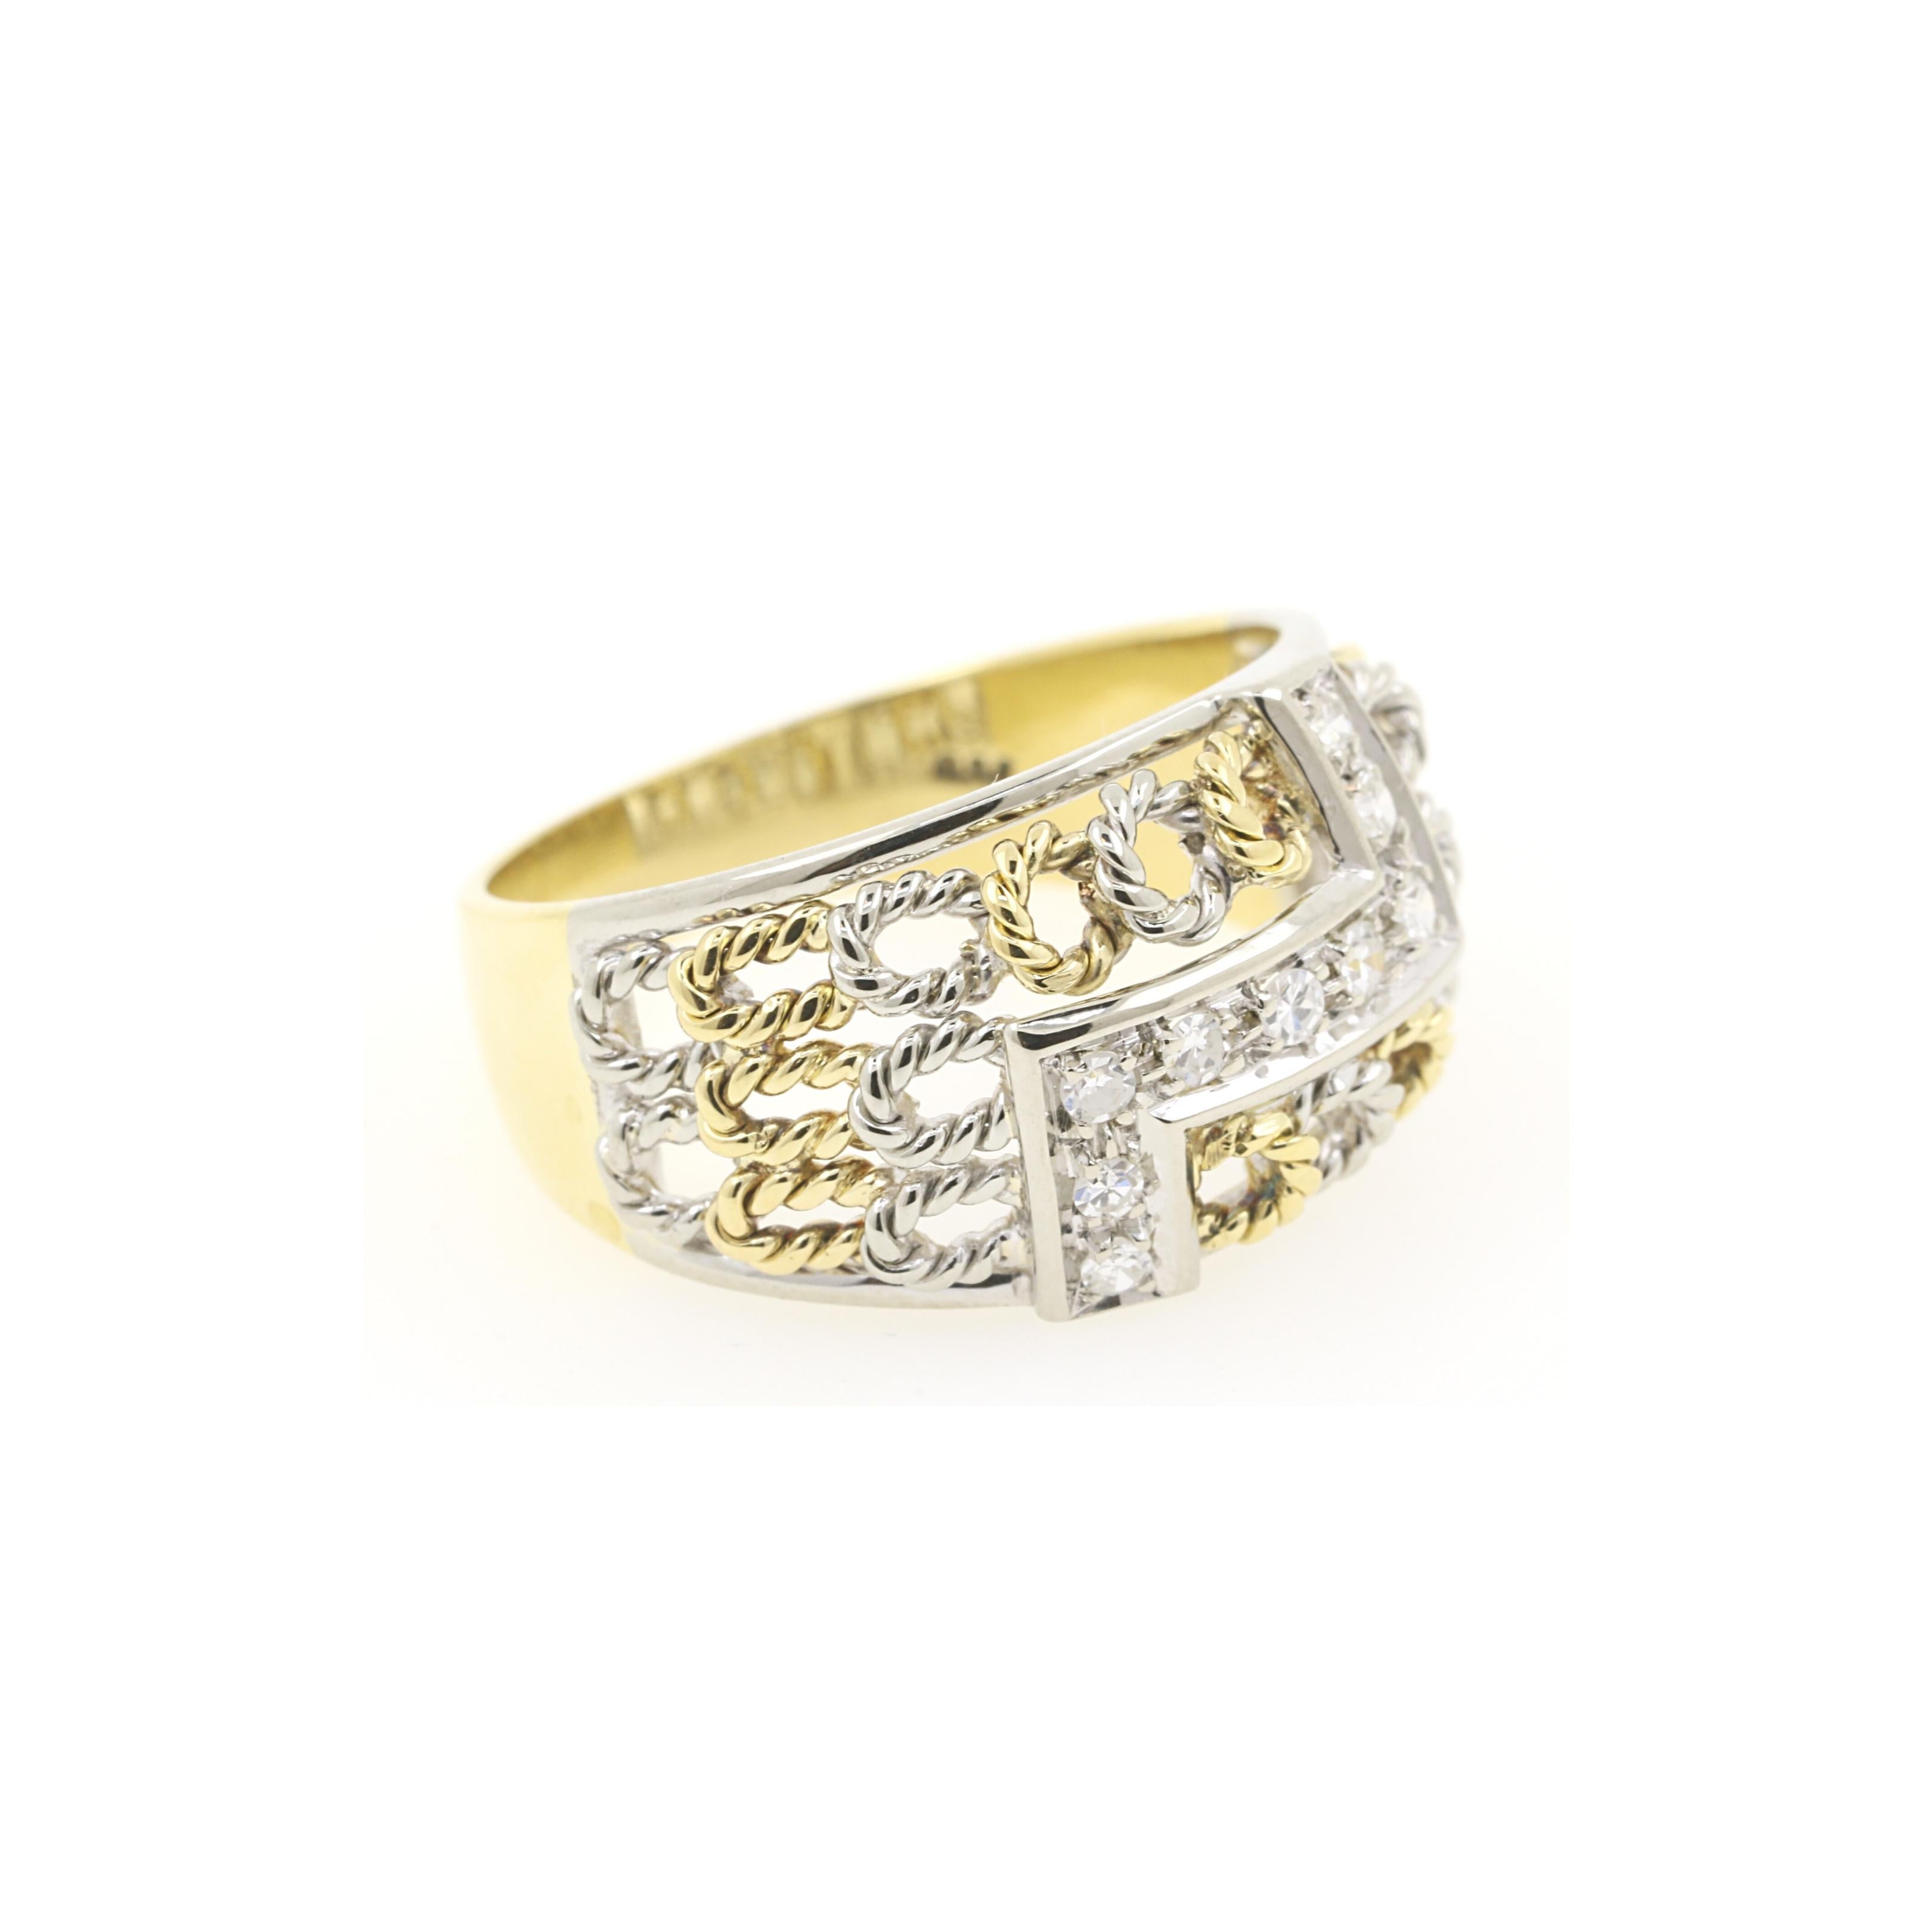 18 karat yellow and white gold ring with diamonds and a nice chain-alike creative motive. 
The ring has 9 diamonds channel set, round brilliant cut, G/H color and VS clarity for a total estimated weight of 0.20 carats.
The finger size is 54 and its